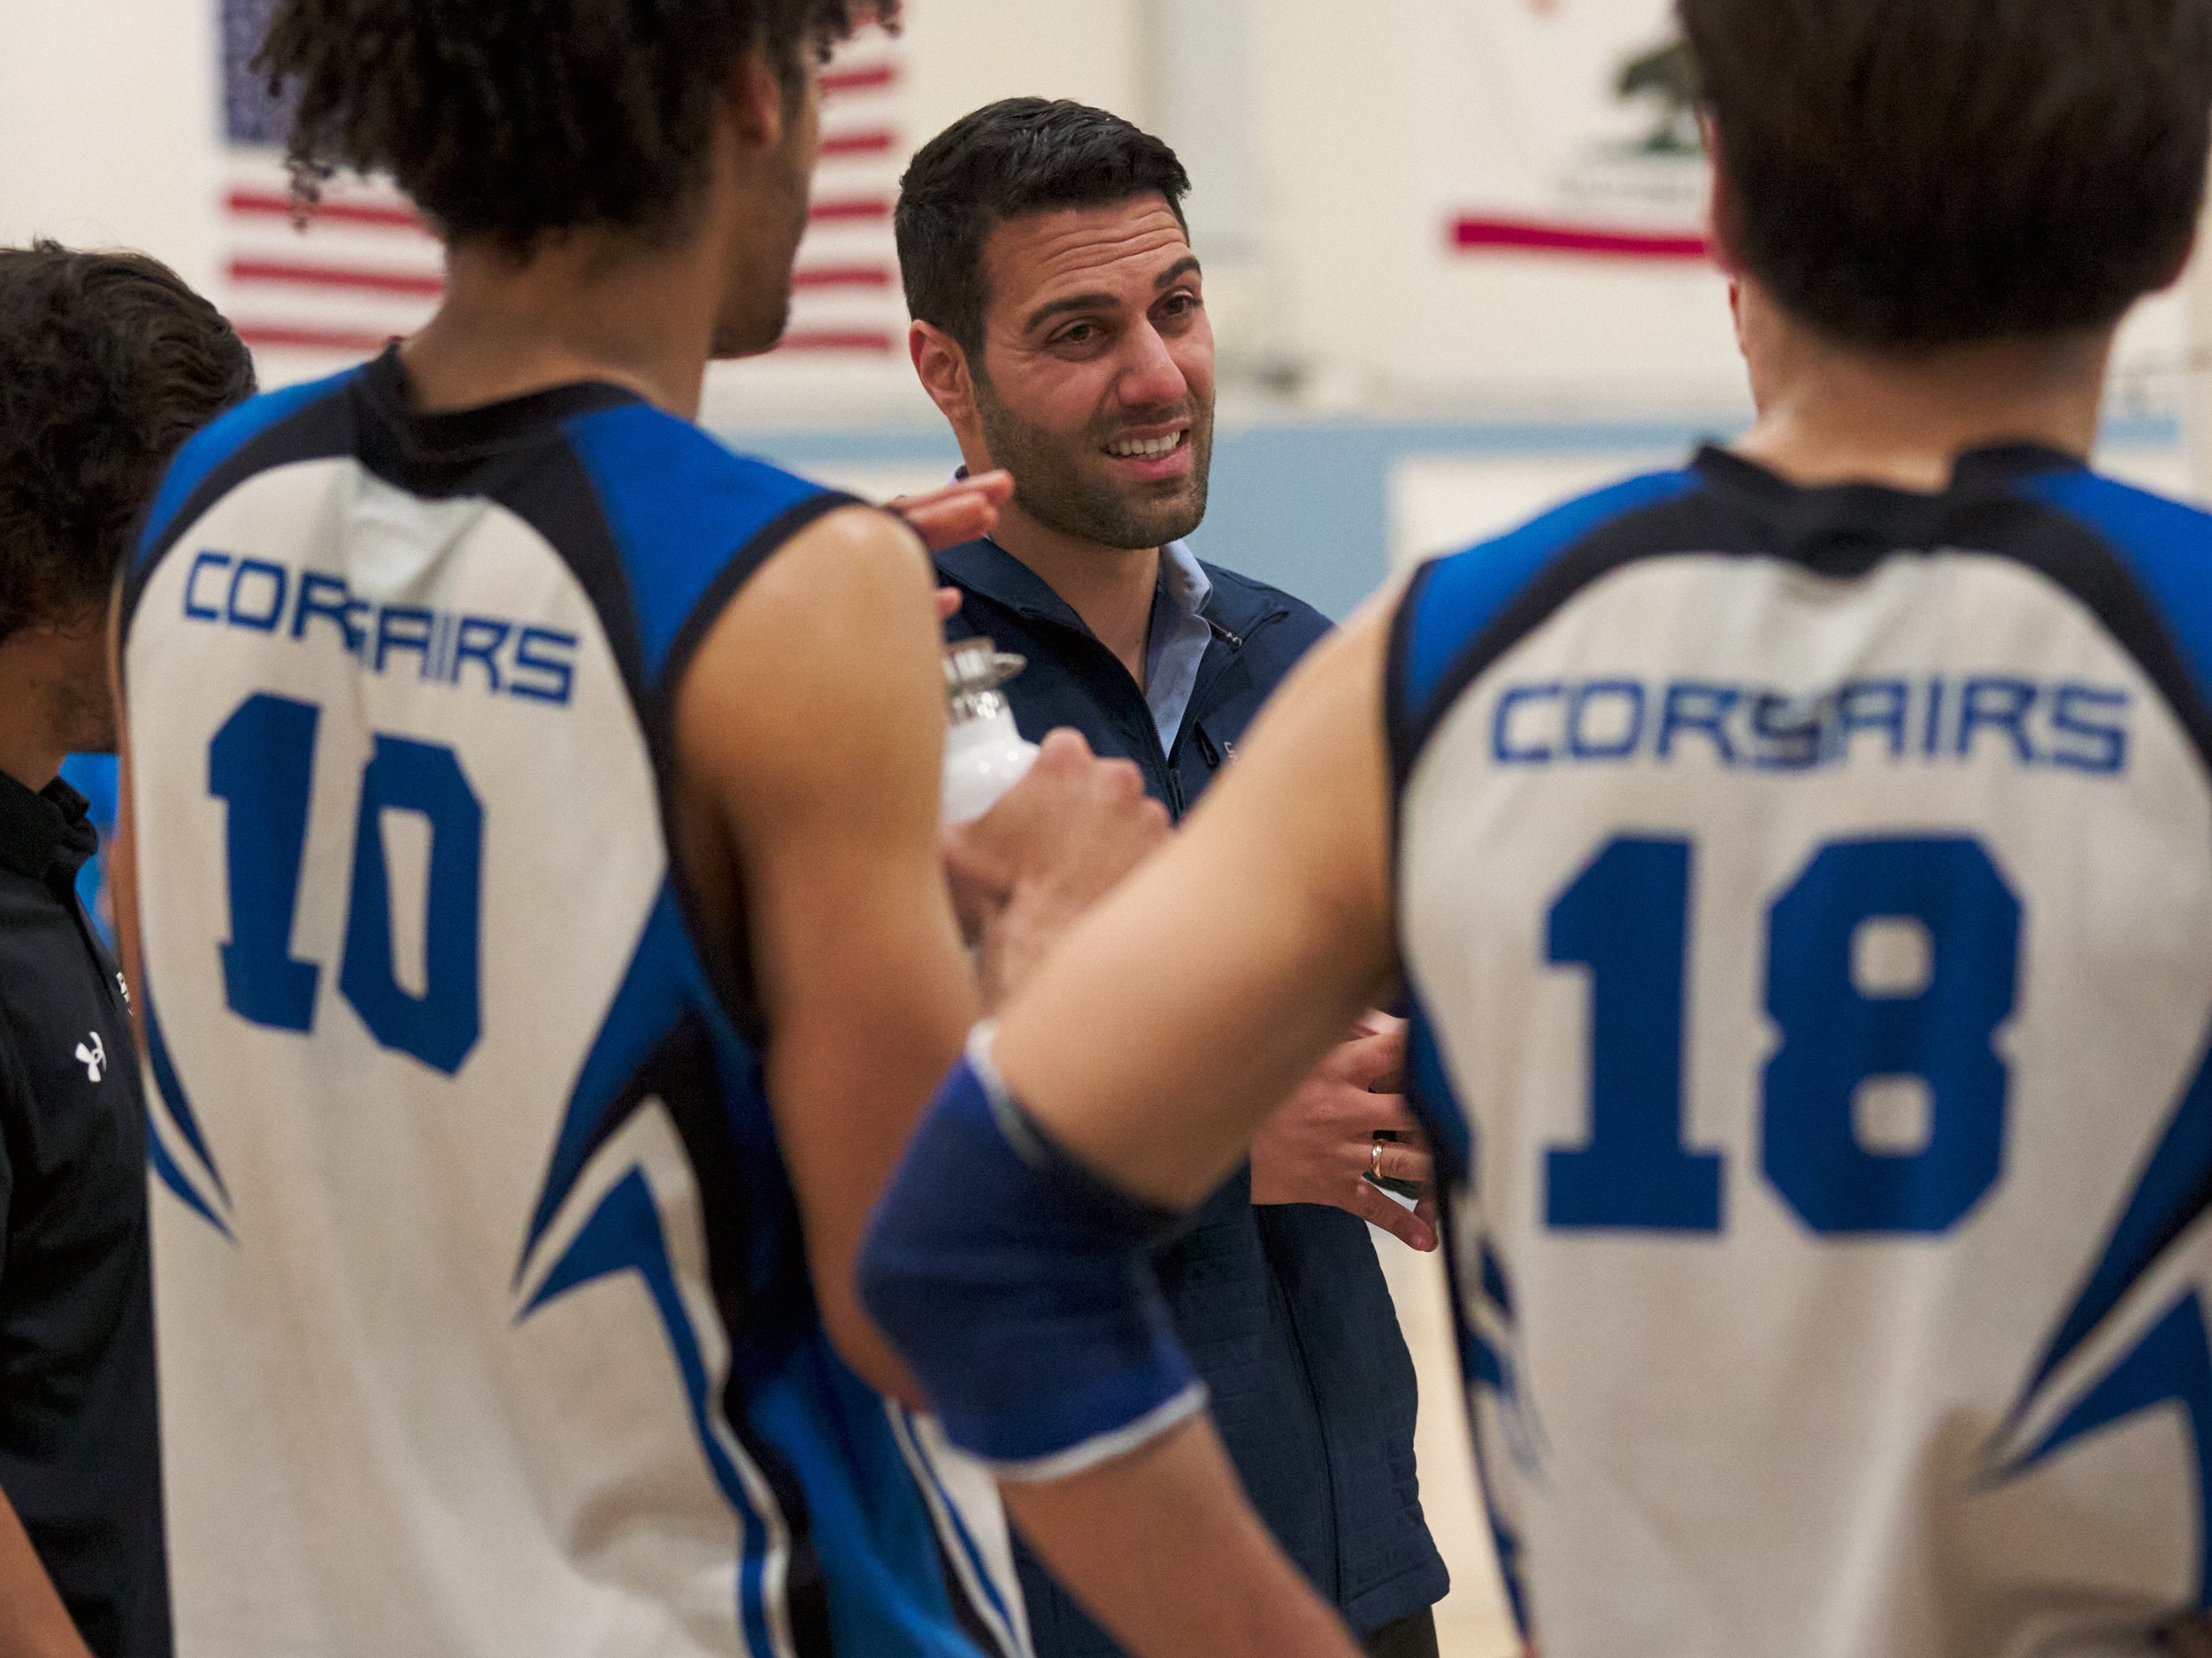  Santa Monica College Corsairs' Men's Volleyball Head Coach Liran Zamir talks to the team during a time out near the end of the third and final set of the men's volleyball match against the Moorpark College Raiders on Wednesday, April 12, 2023, at Co